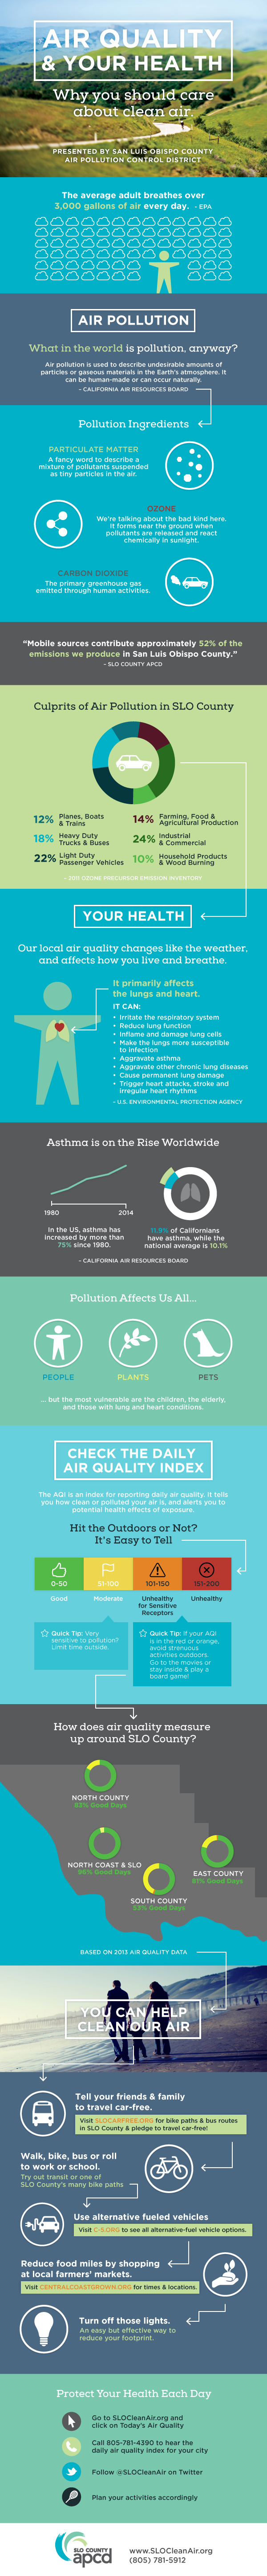 infographic air quality